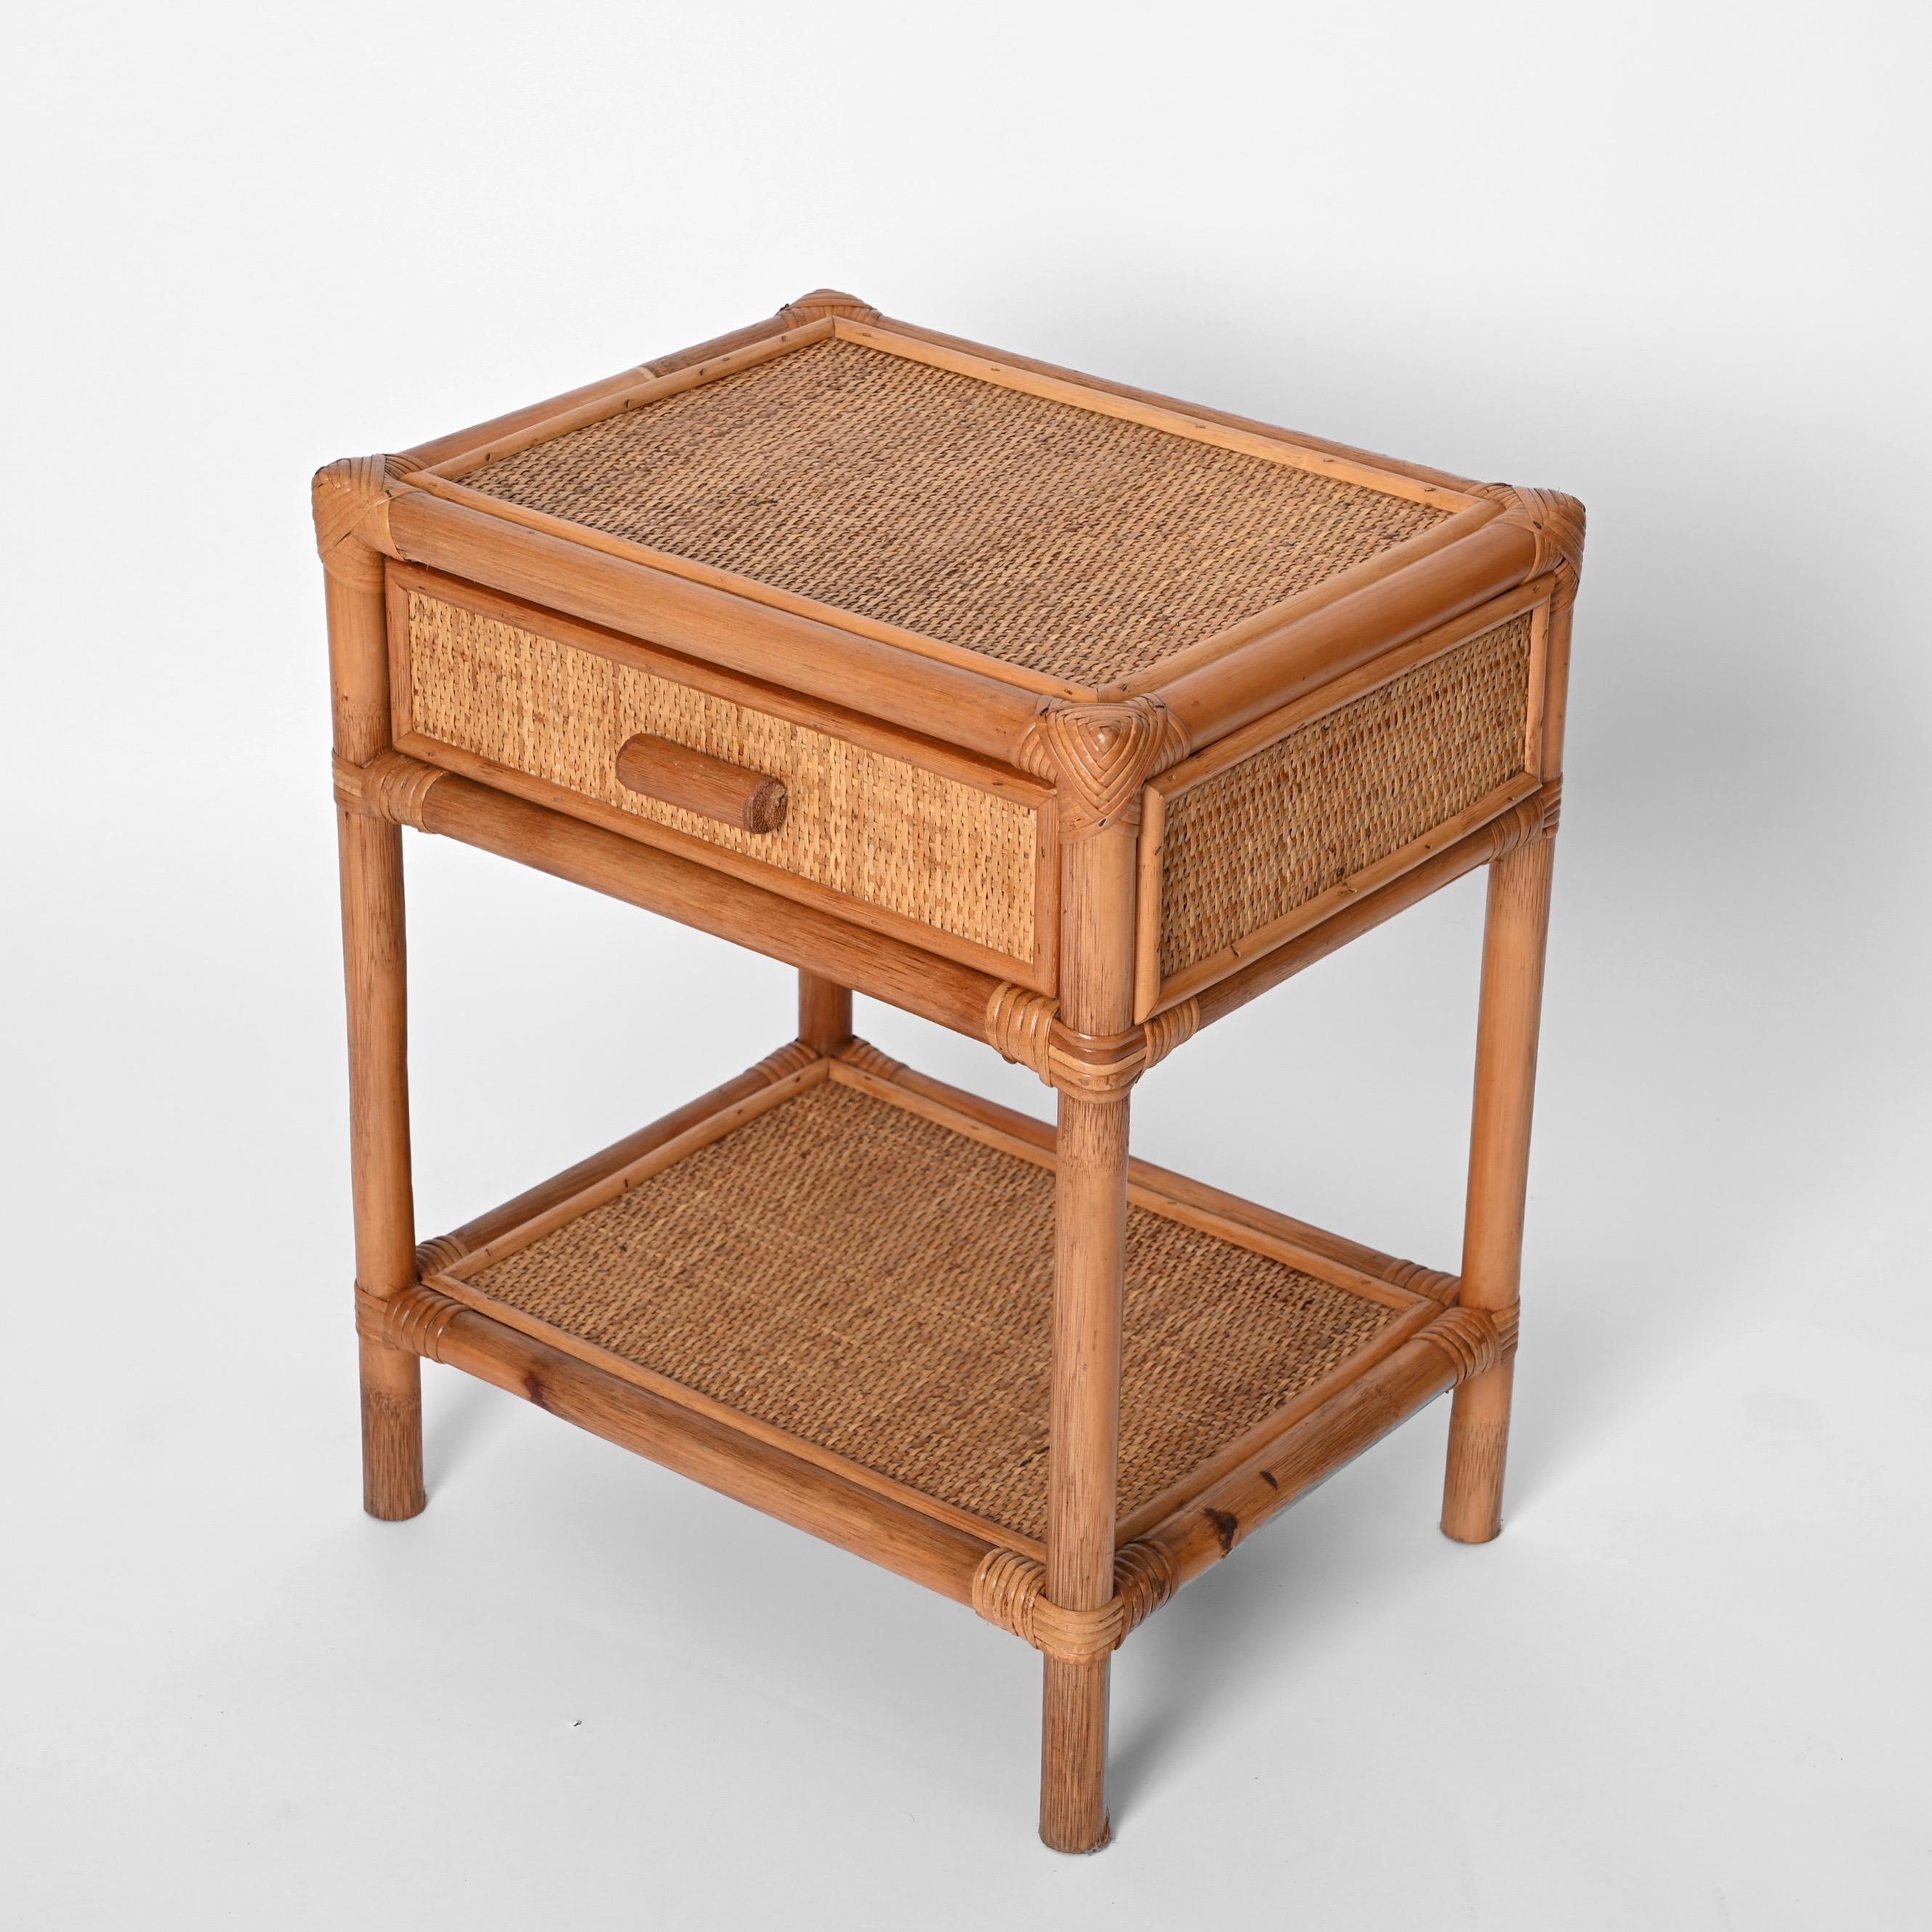 Stunning Mid-Century Modern bamboo and rattan bedside tables. This fantastic piece was designed in Italy during the 1970s.

The key features of this wonderful bedside table are the beautiful rationalist straight lines, improved by using natural